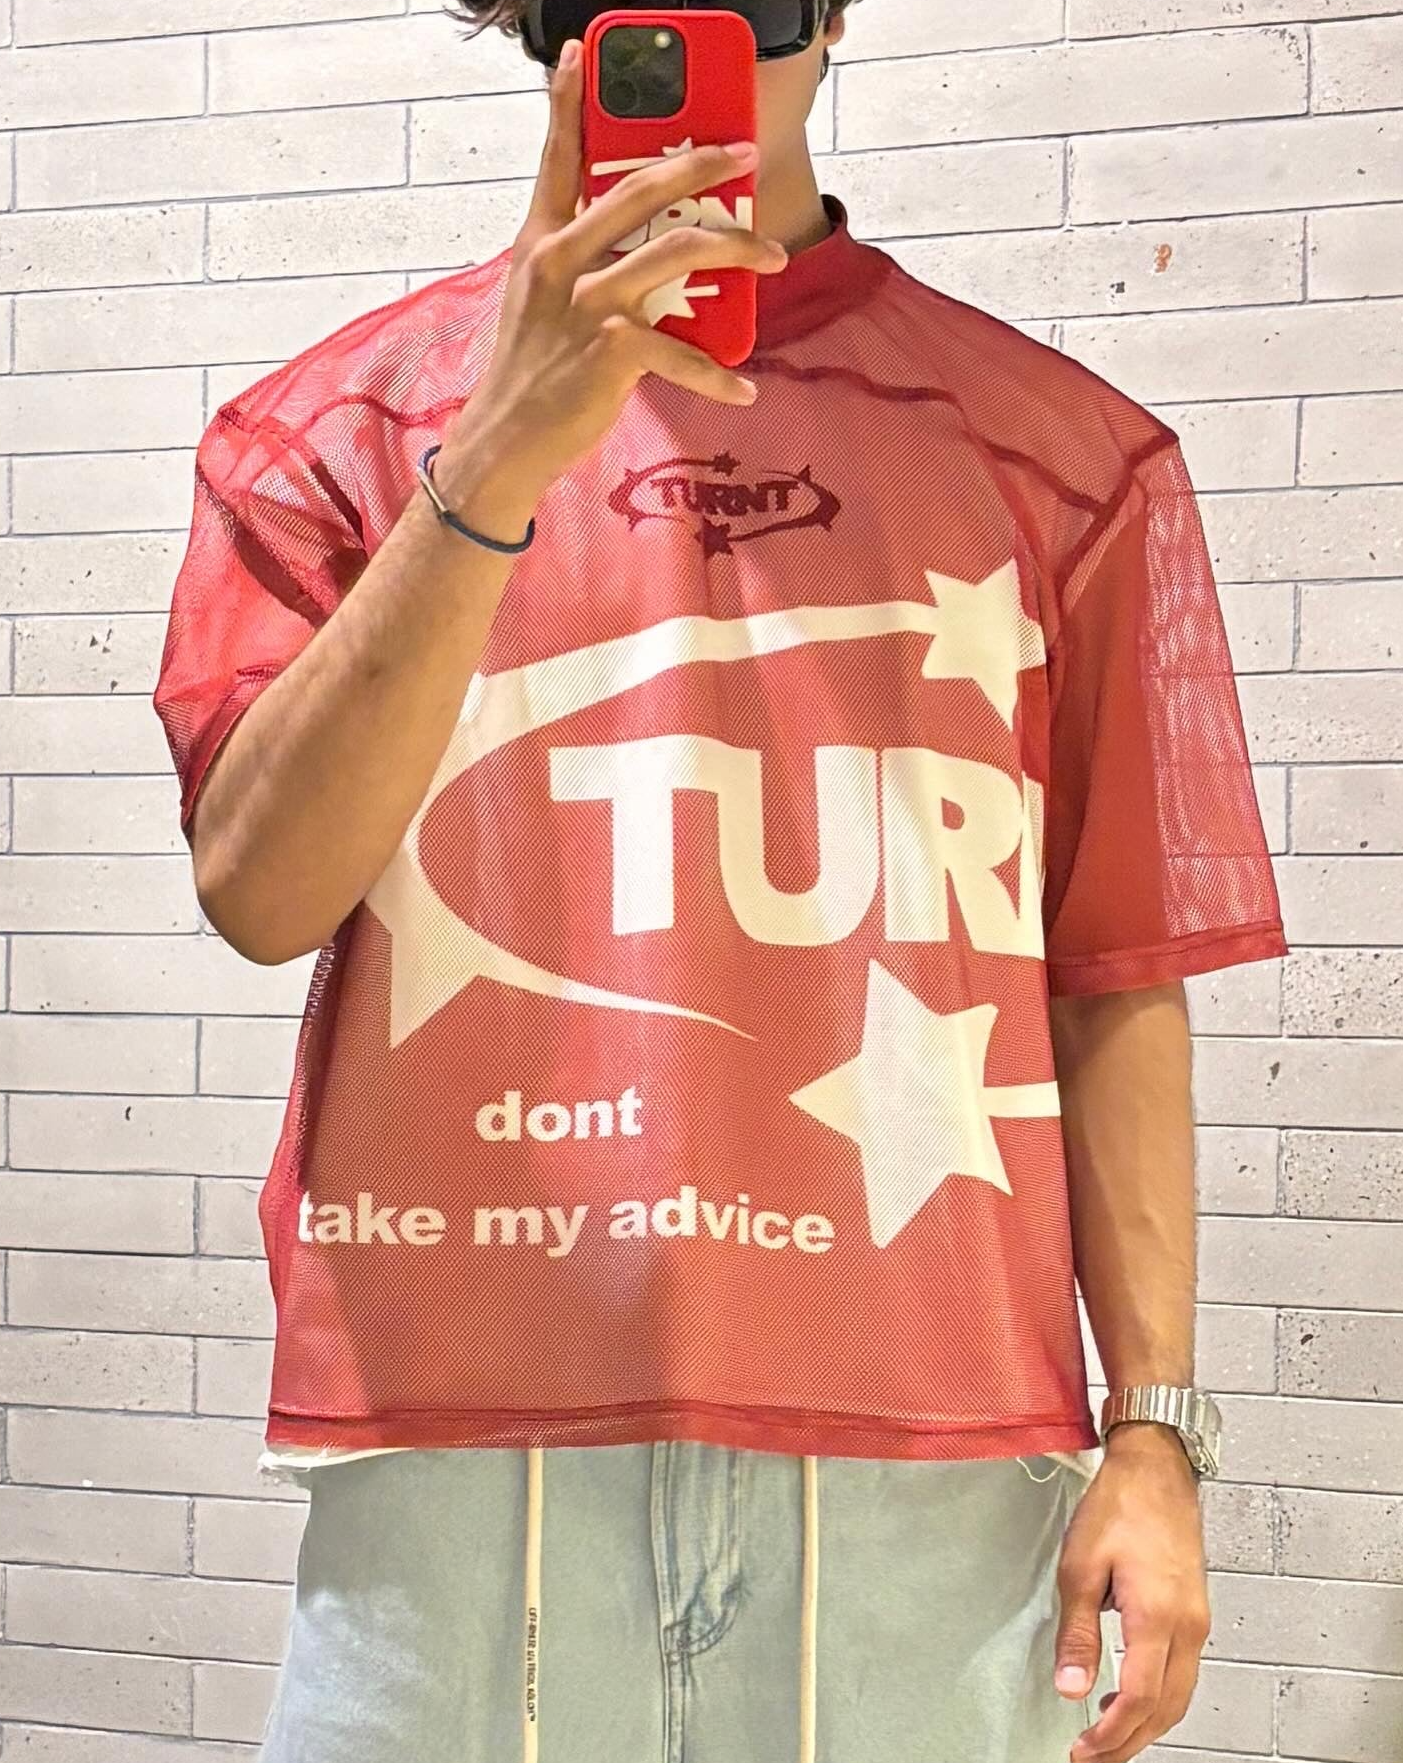 TURNT RED MESH JERSEY